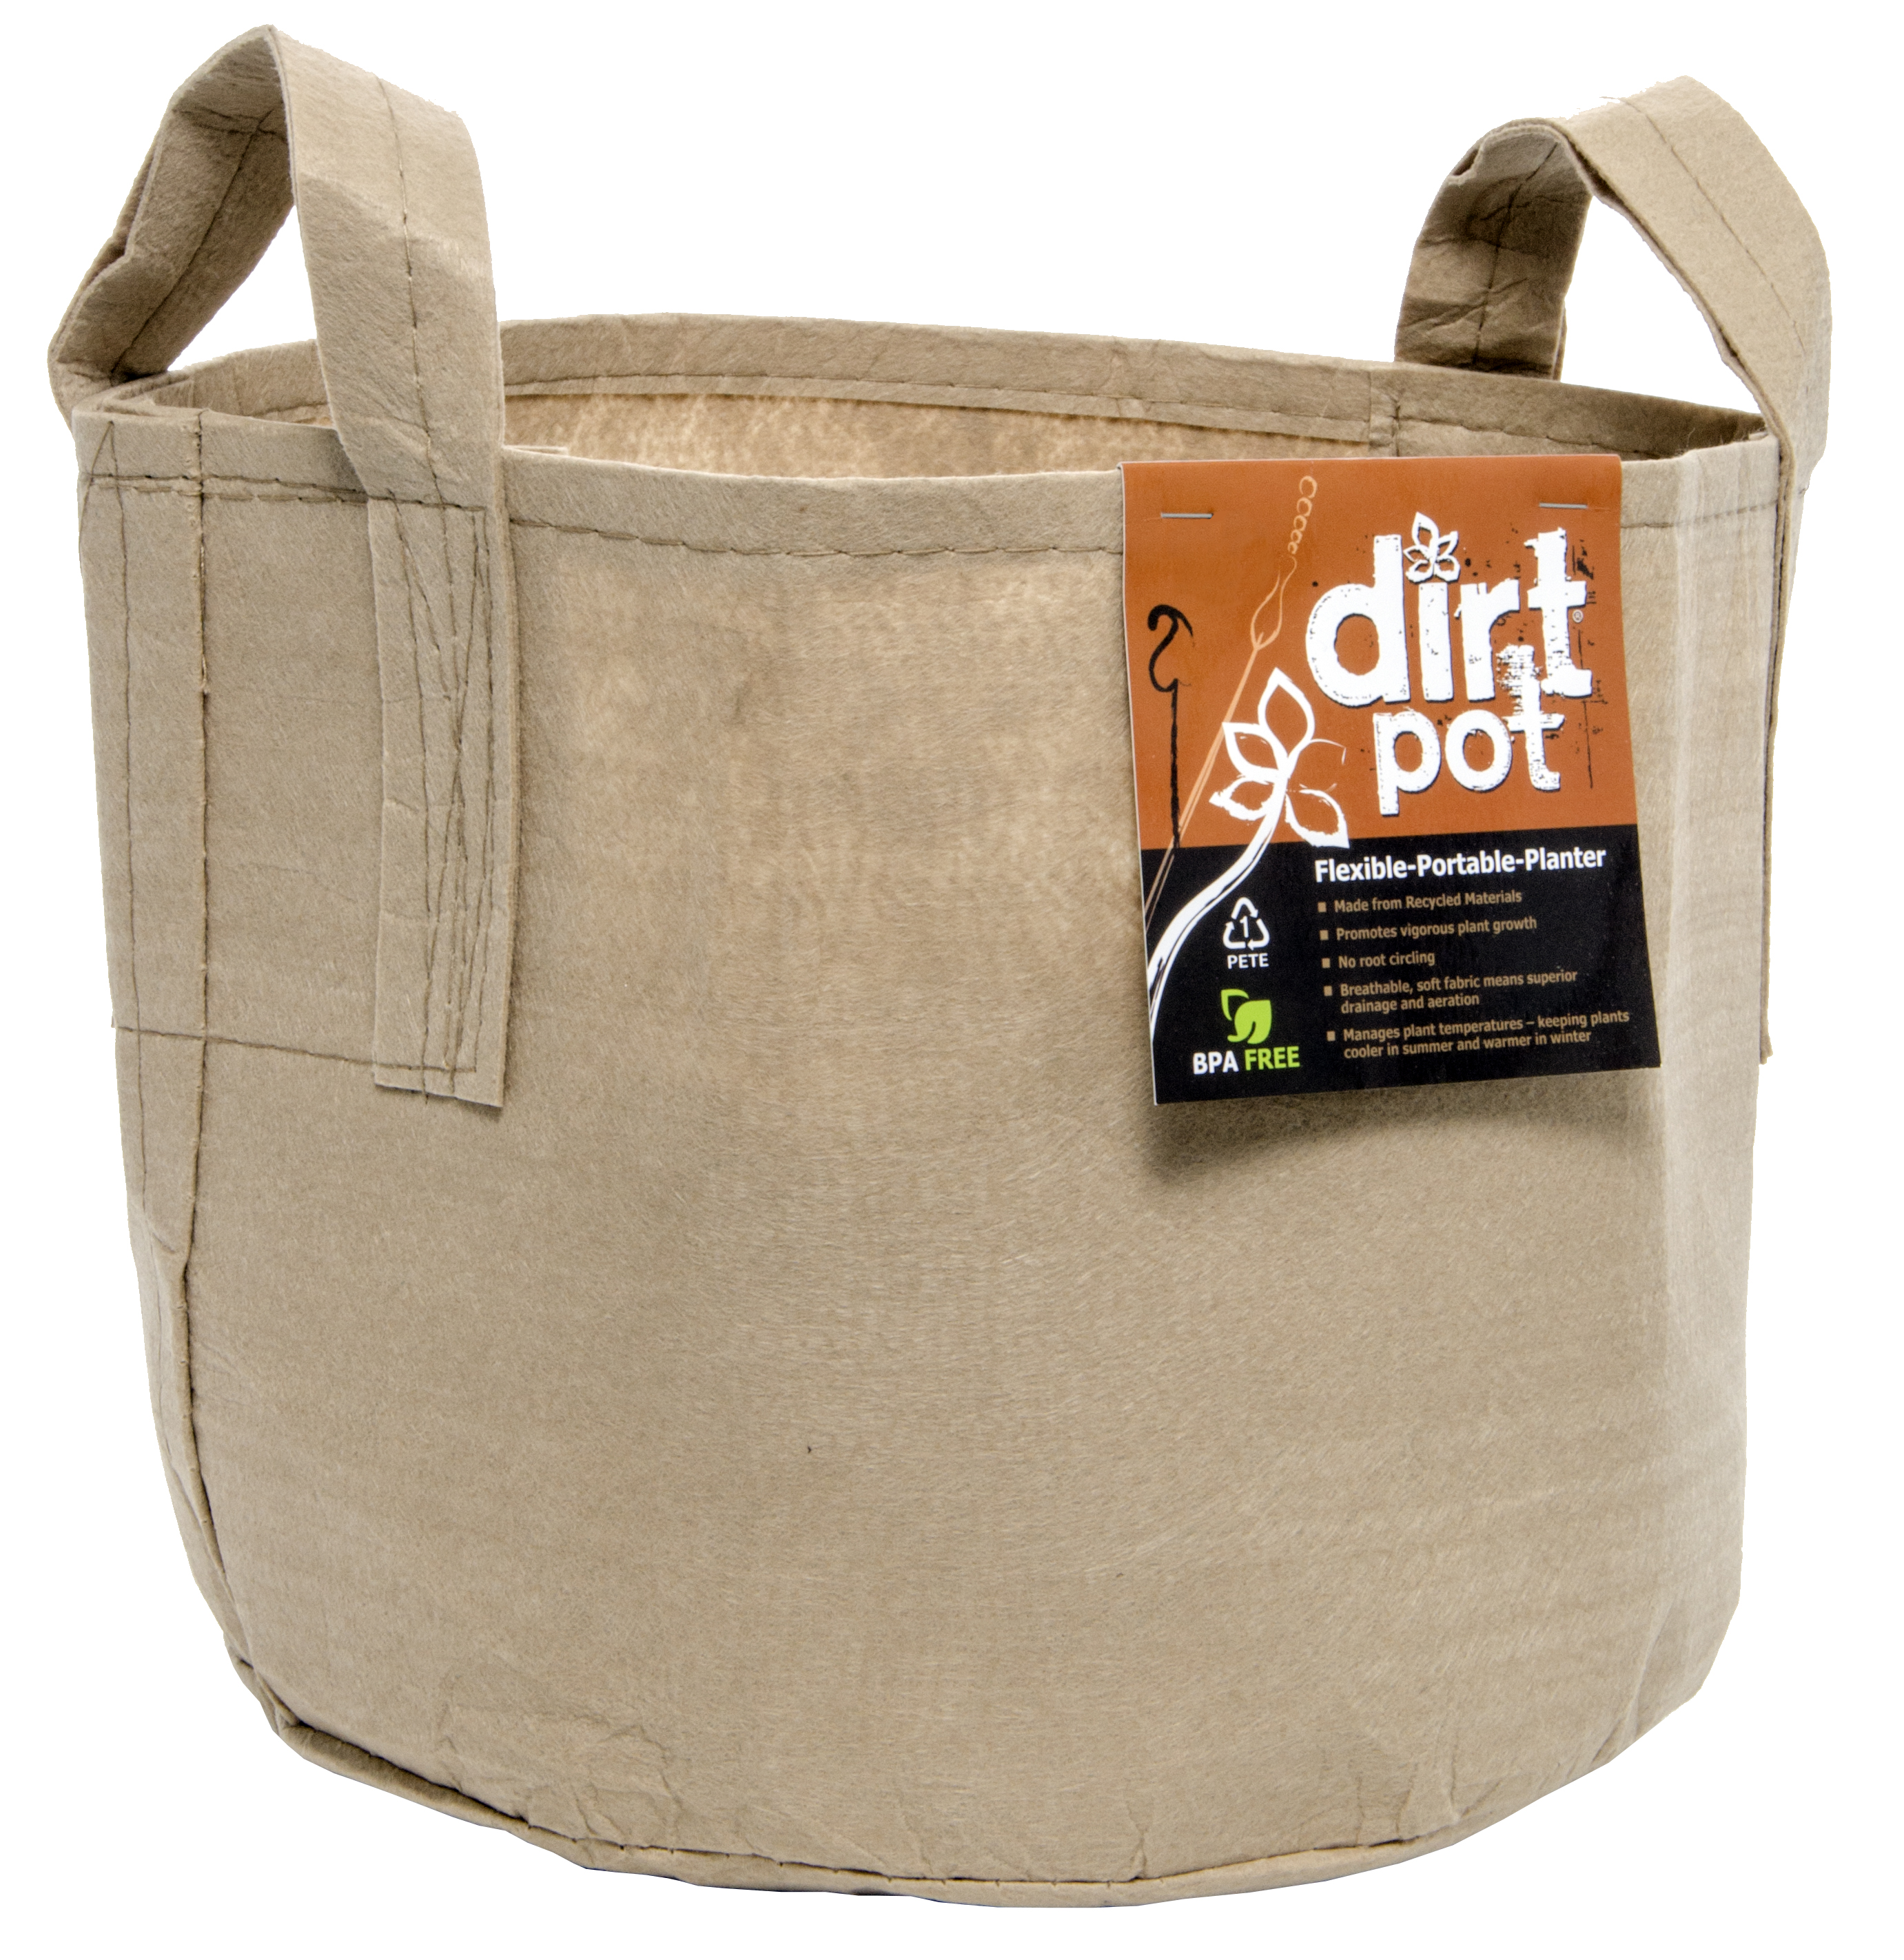 Picture for Dirt Pot Flexible Portable Planter, Tan, 5 gal, with handles